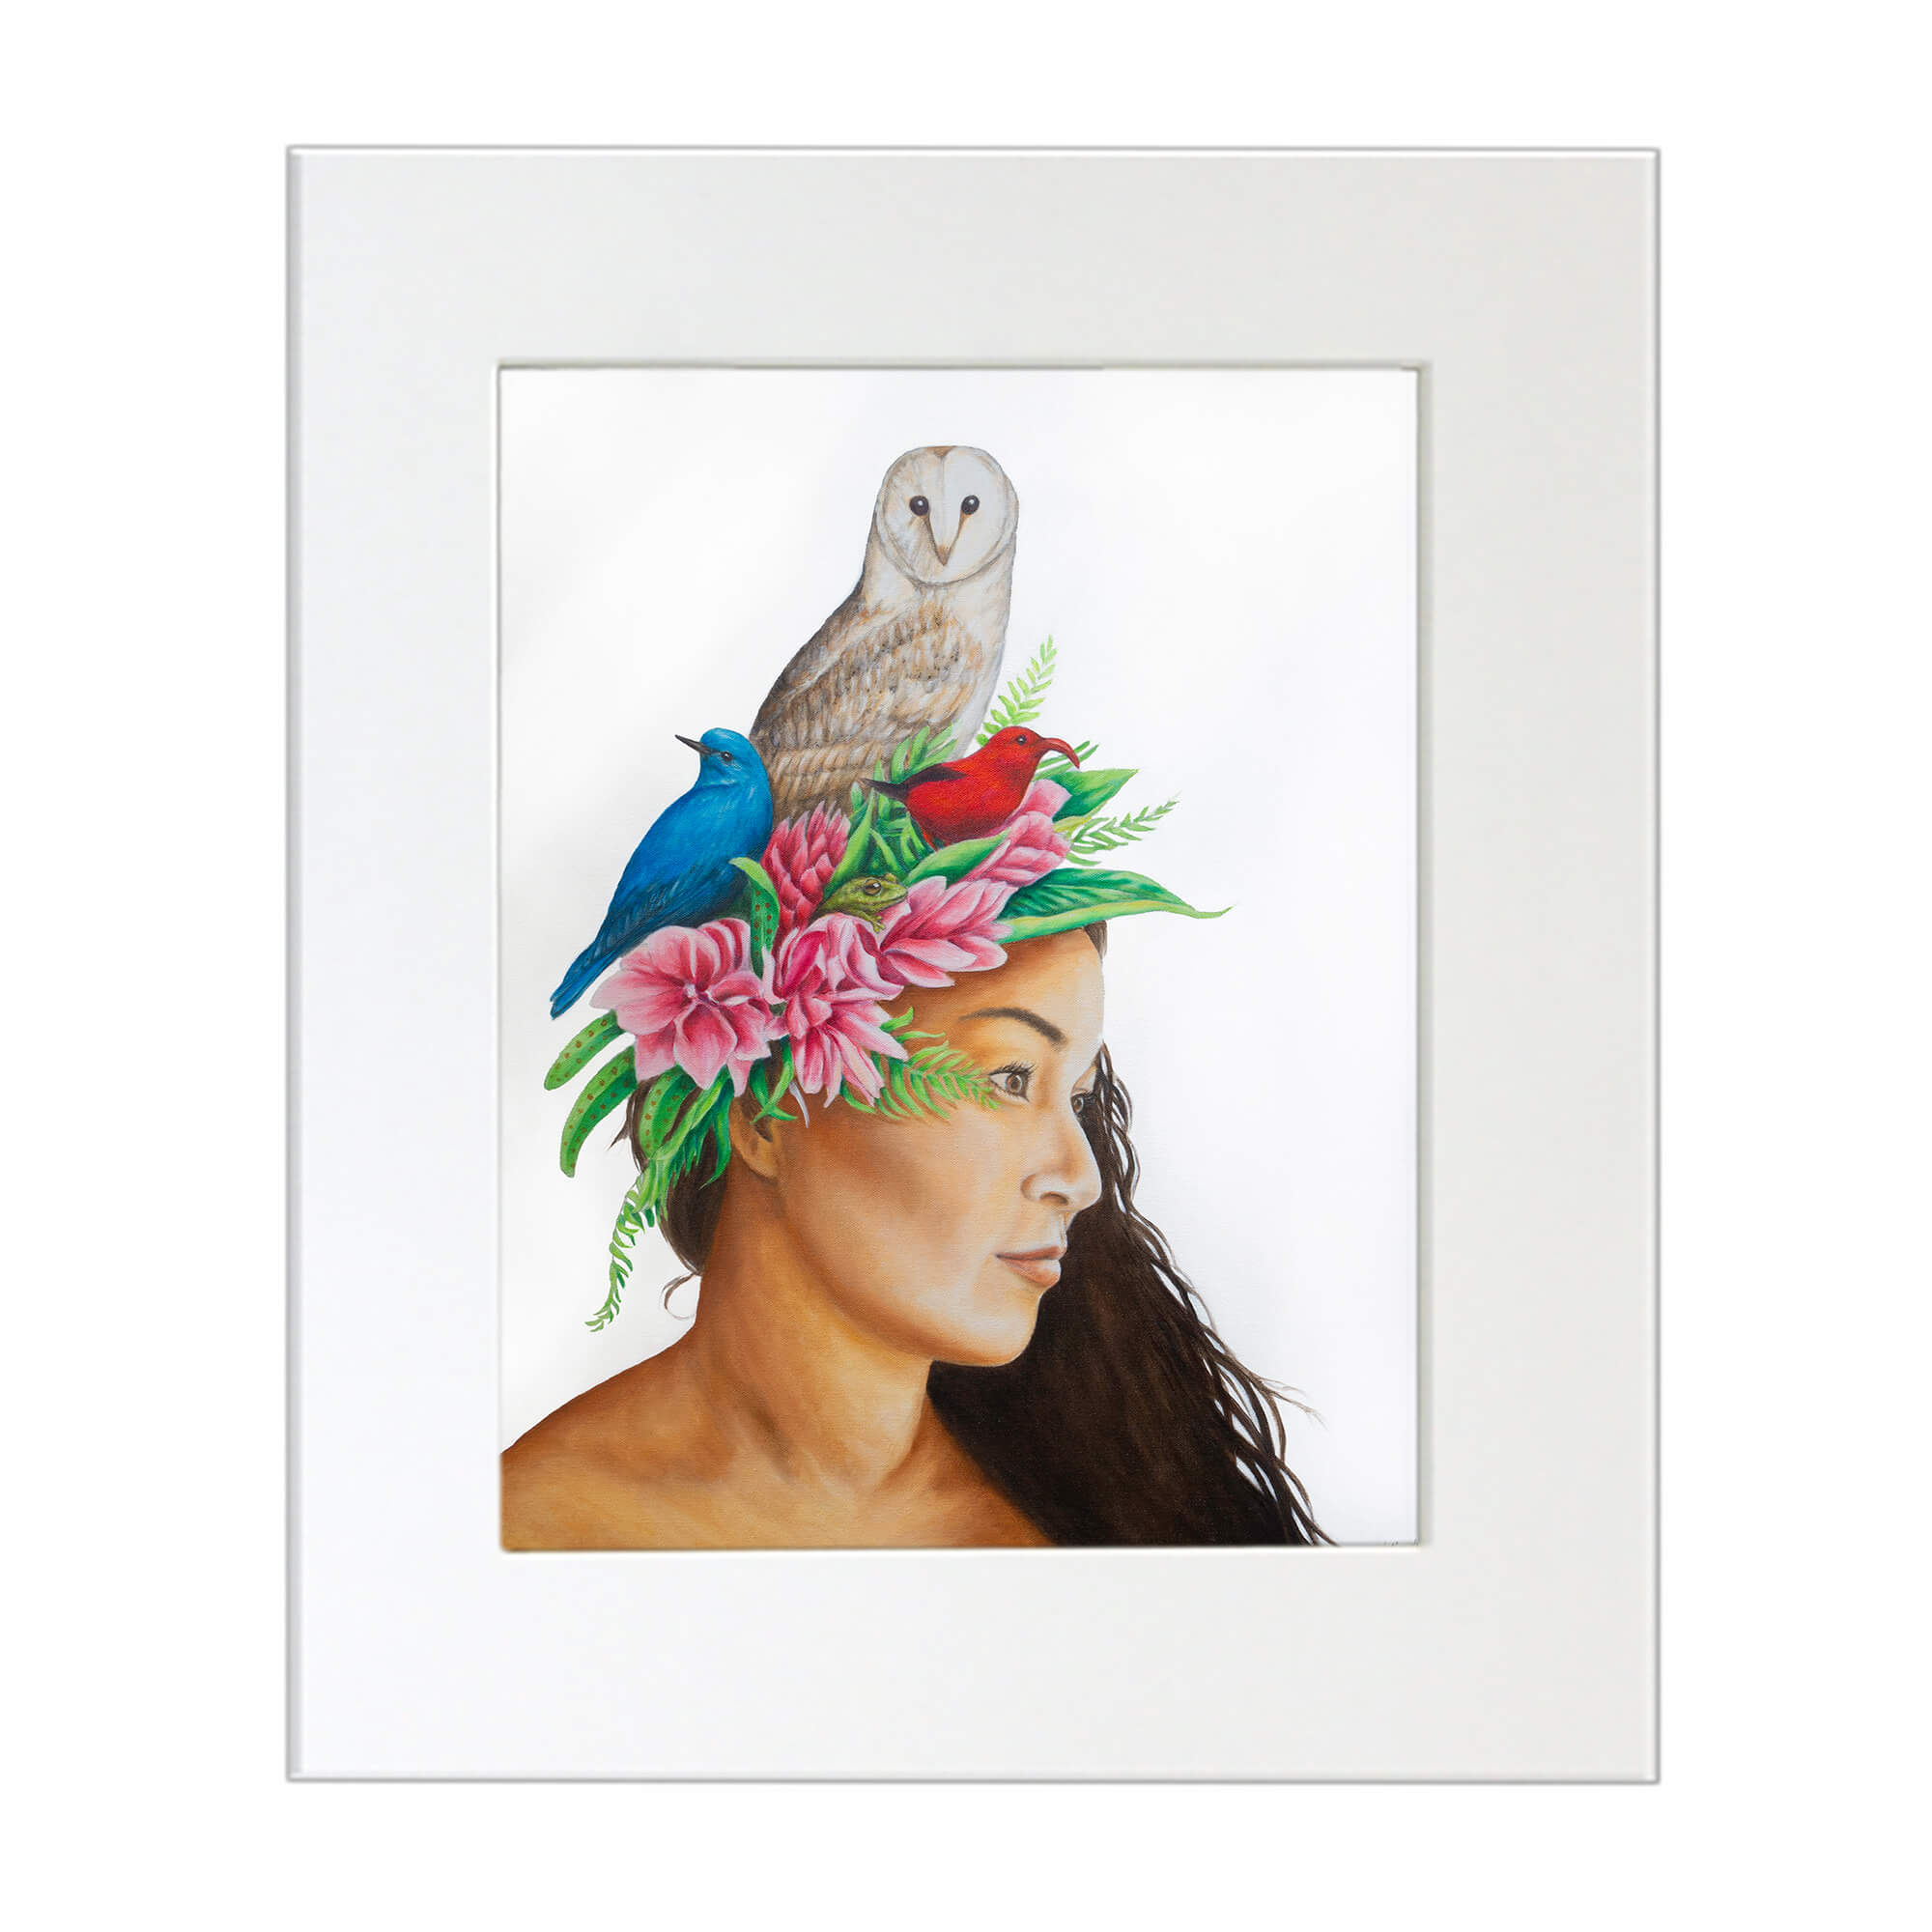 Matted art print of as woman with two birds on her head by hawaii artist Kelly Keane